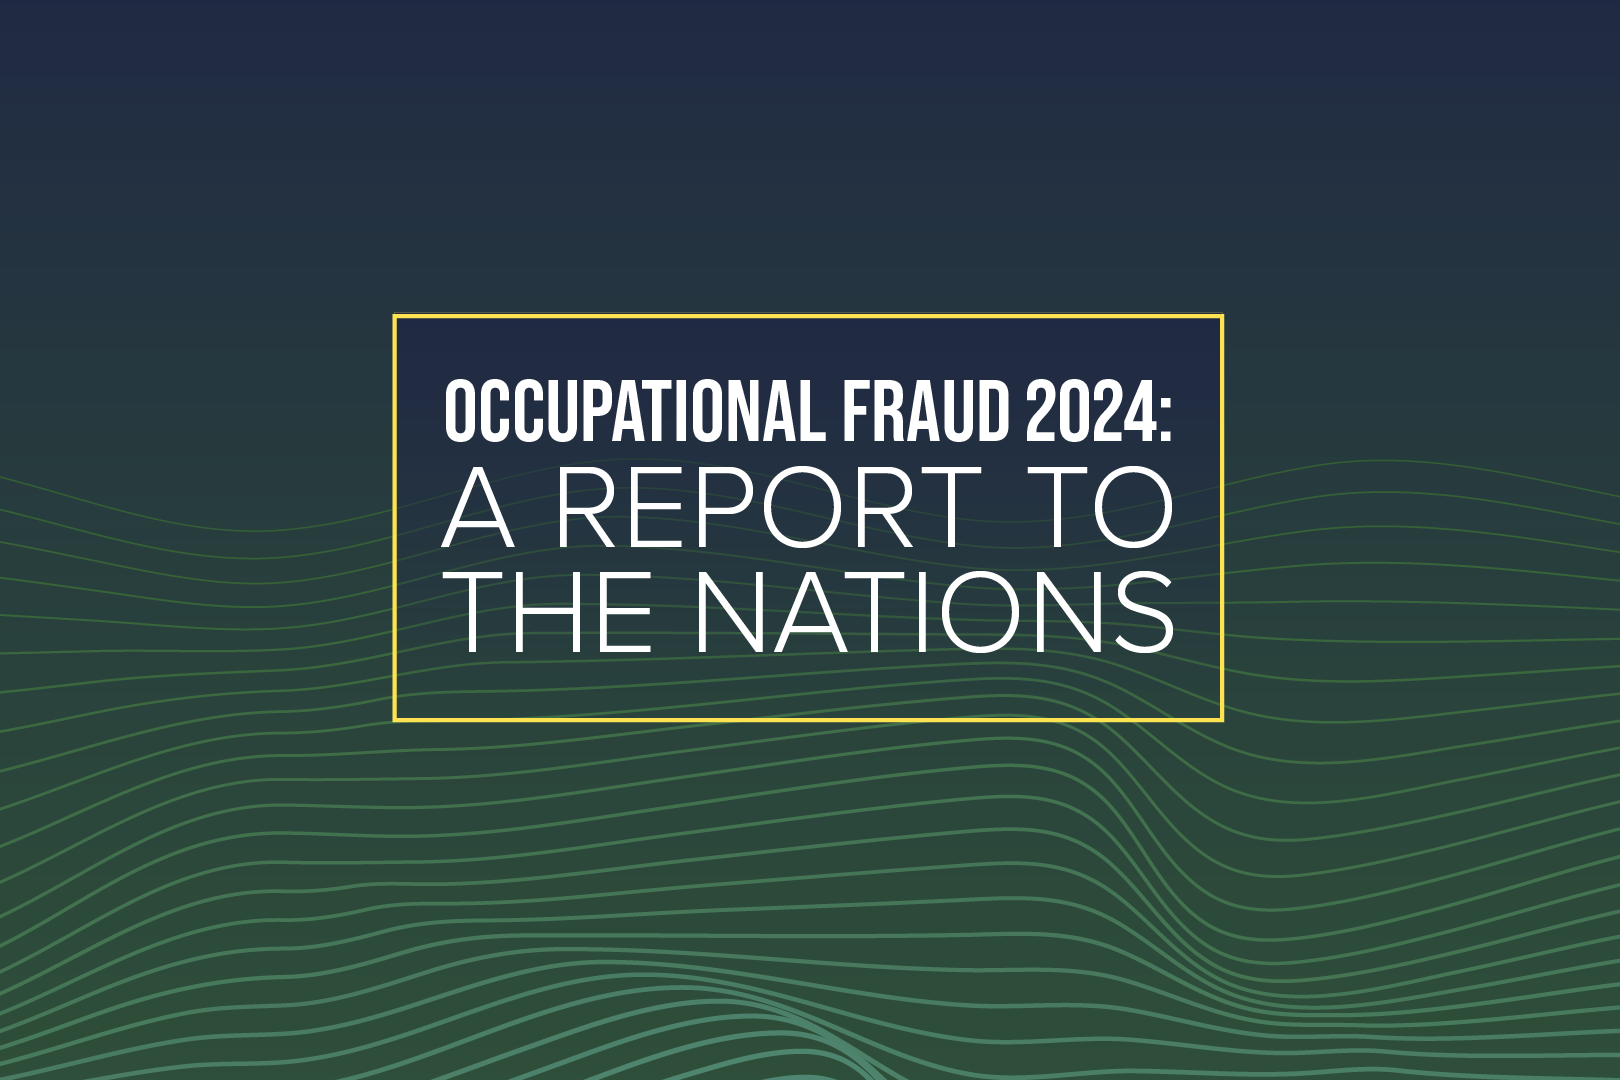 Occupational Fraud 2024: A Report to the Nations, a publication of the ACFE